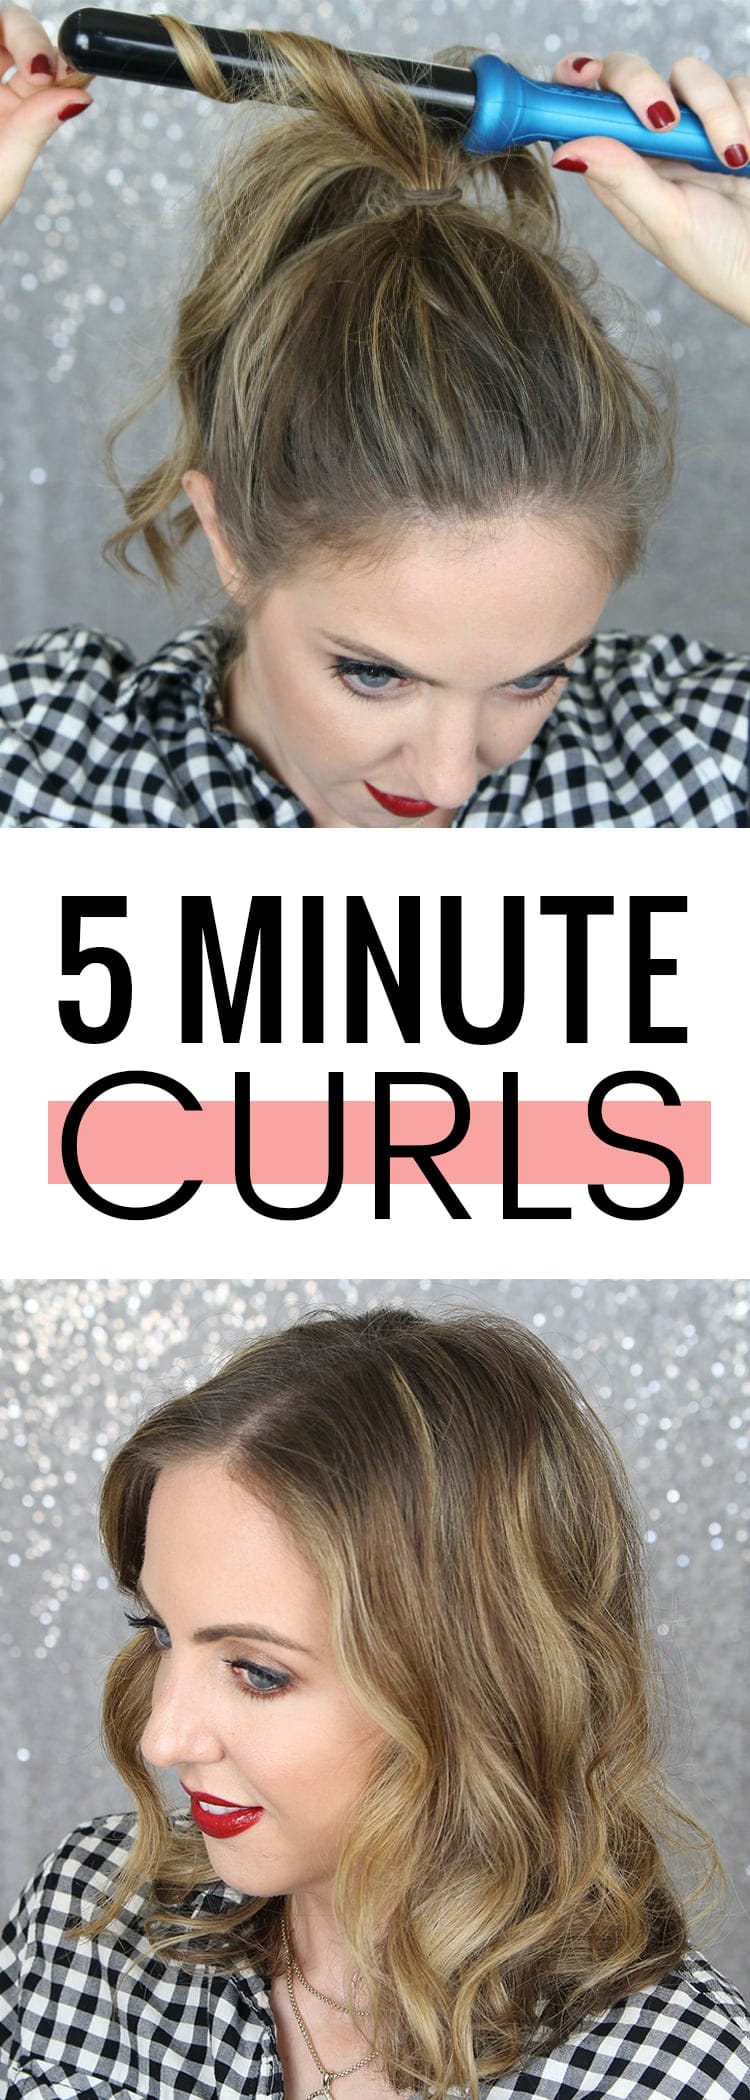 5 minute curls! How to curl your hair in 5 minutes or less. Click through for the tutorial!